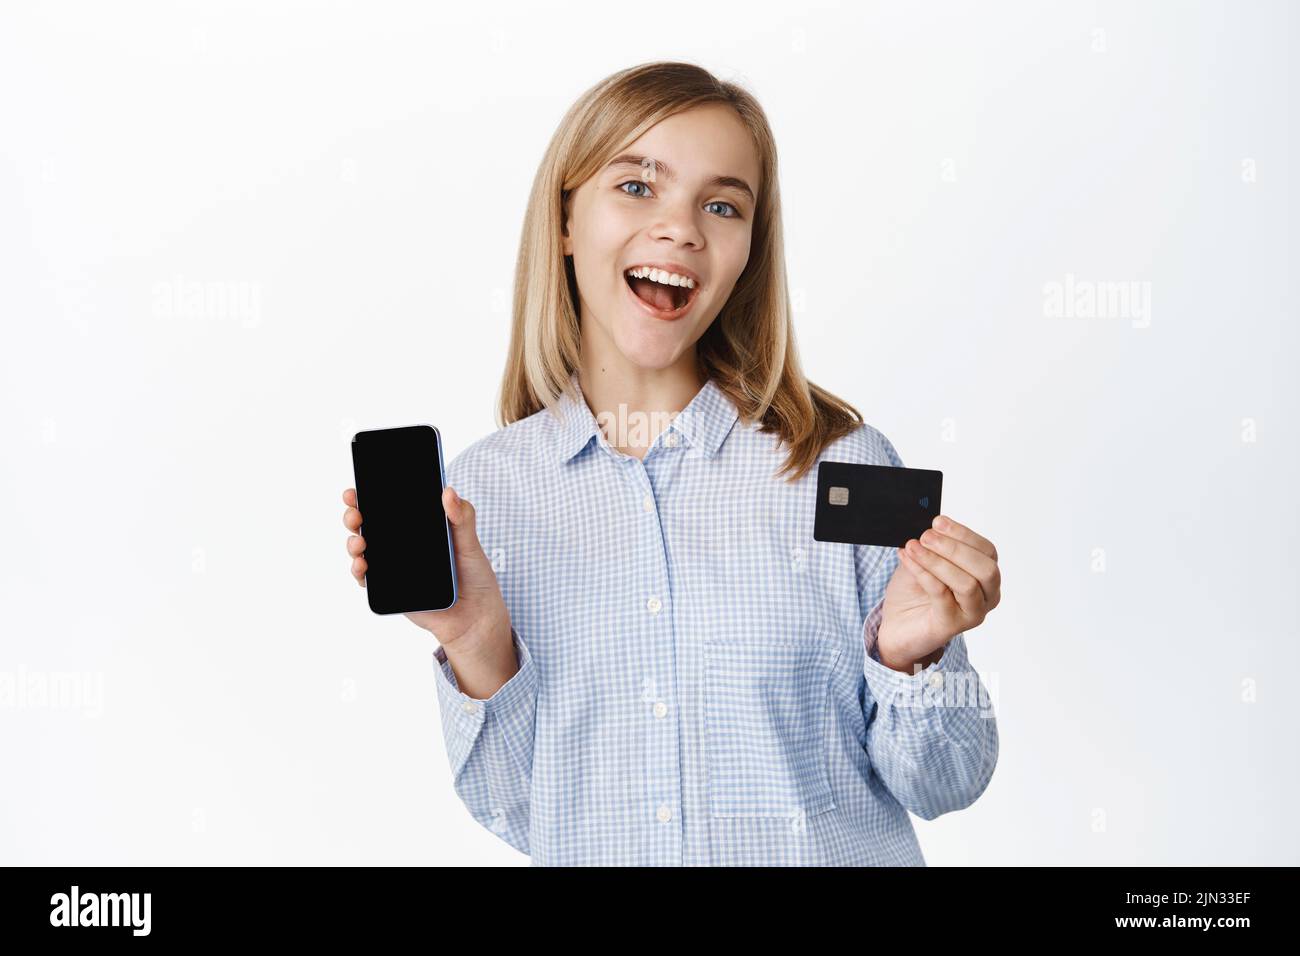 Happy smiling blond girl, teen child showing mobile phone screen and credit card, app interface, laughing excited, standing over white background Stock Photo